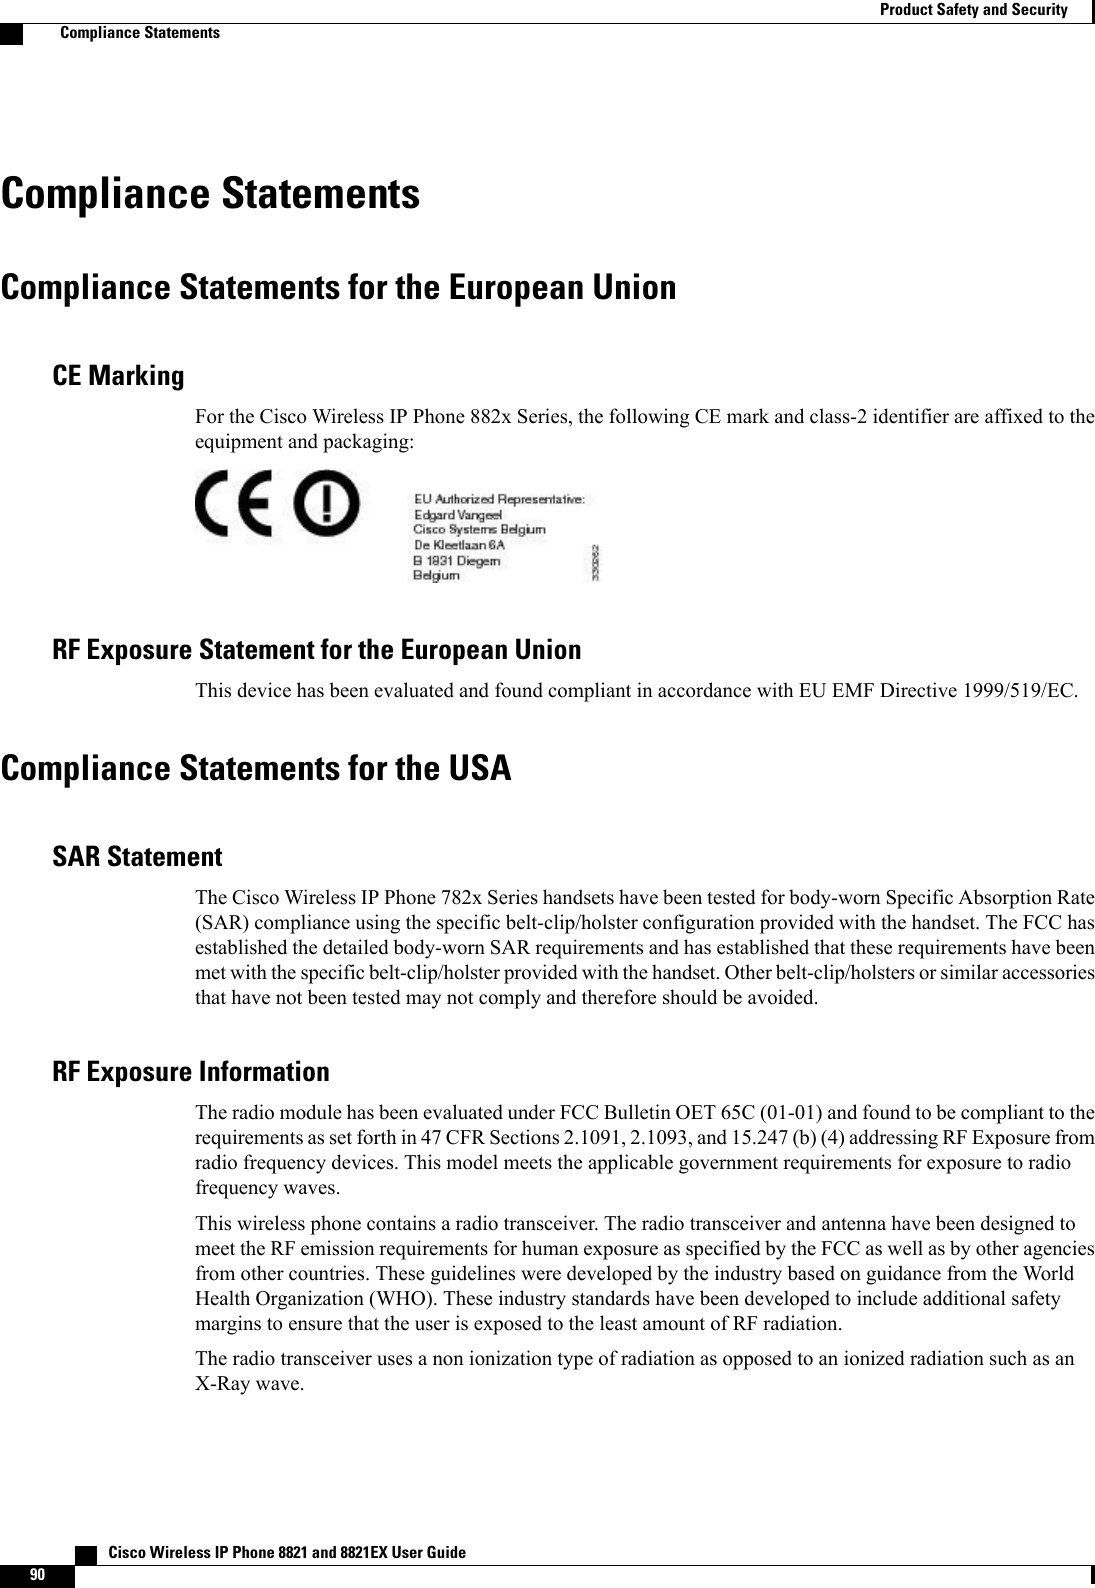 Compliance StatementsCompliance Statements for the European UnionCE MarkingFor the Cisco Wireless IP Phone 882x Series, the following CE mark and class-2 identifier are affixed to theequipment and packaging:RF Exposure Statement for the European UnionThis device has been evaluated and found compliant in accordance with EU EMF Directive 1999/519/EC.Compliance Statements for the USASAR StatementThe Cisco Wireless IP Phone 782x Series handsets have been tested for body-worn Specific Absorption Rate(SAR) compliance using the specific belt-clip/holster configuration provided with the handset. The FCC hasestablished the detailed body-worn SAR requirements and has established that these requirements have beenmet with the specific belt-clip/holster provided with the handset. Other belt-clip/holsters or similar accessoriesthat have not been tested may not comply and therefore should be avoided.RF Exposure InformationThe radio module has been evaluated under FCC Bulletin OET 65C (01-01) and found to be compliant to therequirements as set forth in 47 CFR Sections 2.1091, 2.1093, and 15.247 (b) (4) addressing RF Exposure fromradio frequency devices. This model meets the applicable government requirements for exposure to radiofrequency waves.This wireless phone contains a radio transceiver. The radio transceiver and antenna have been designed tomeet the RF emission requirements for human exposure as specified by the FCC as well as by other agenciesfrom other countries. These guidelines were developed by the industry based on guidance from the WorldHealth Organization (WHO). These industry standards have been developed to include additional safetymargins to ensure that the user is exposed to the least amount of RF radiation.The radio transceiver uses a non ionization type of radiation as opposed to an ionized radiation such as anX-Ray wave.   Cisco Wireless IP Phone 8821 and 8821EX User Guide90Product Safety and SecurityCompliance Statements